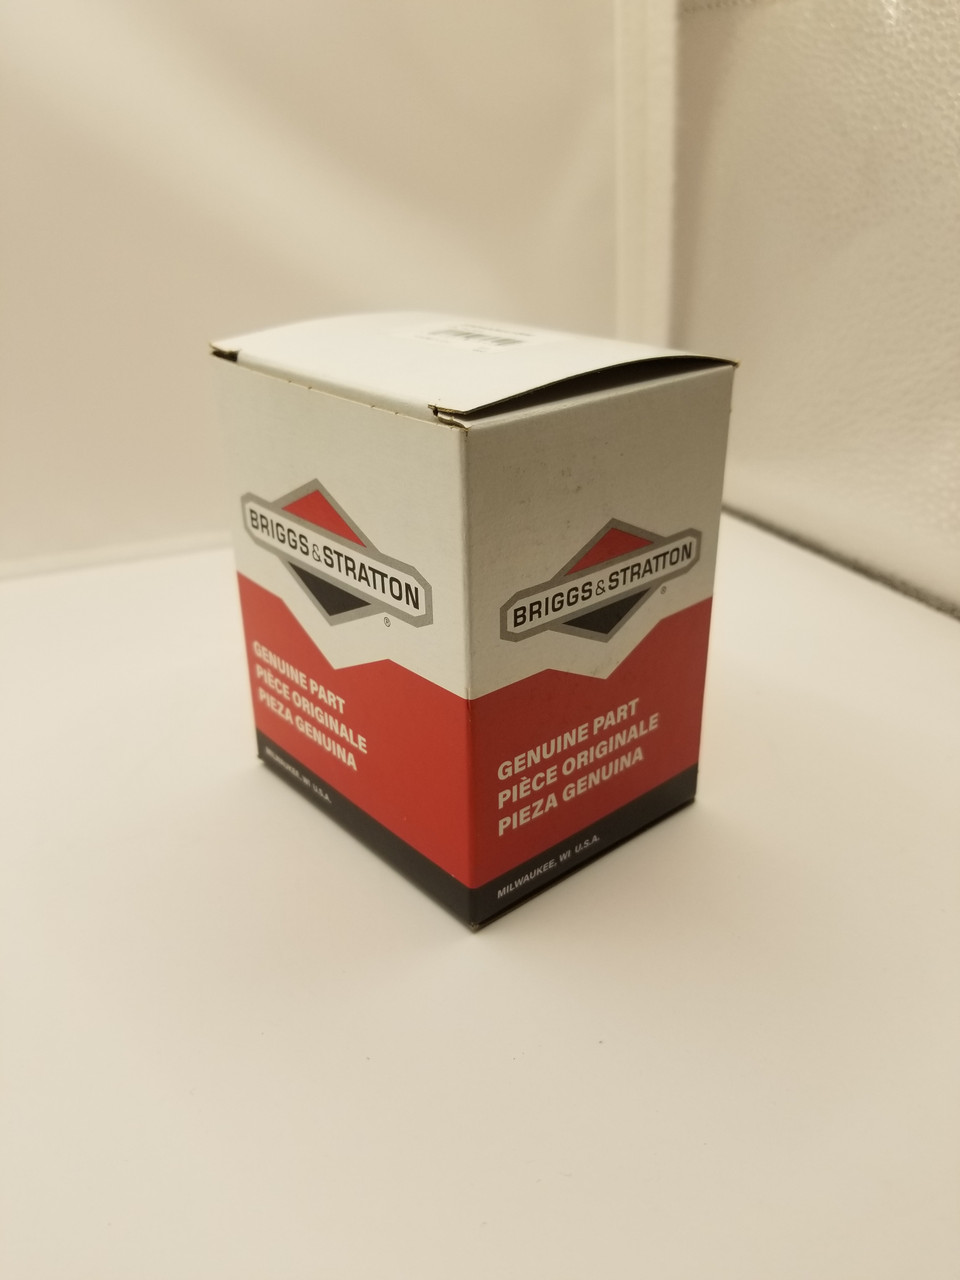 ENGINE PACKED SINGLE CARTON - 125P02-0003-F1 package std